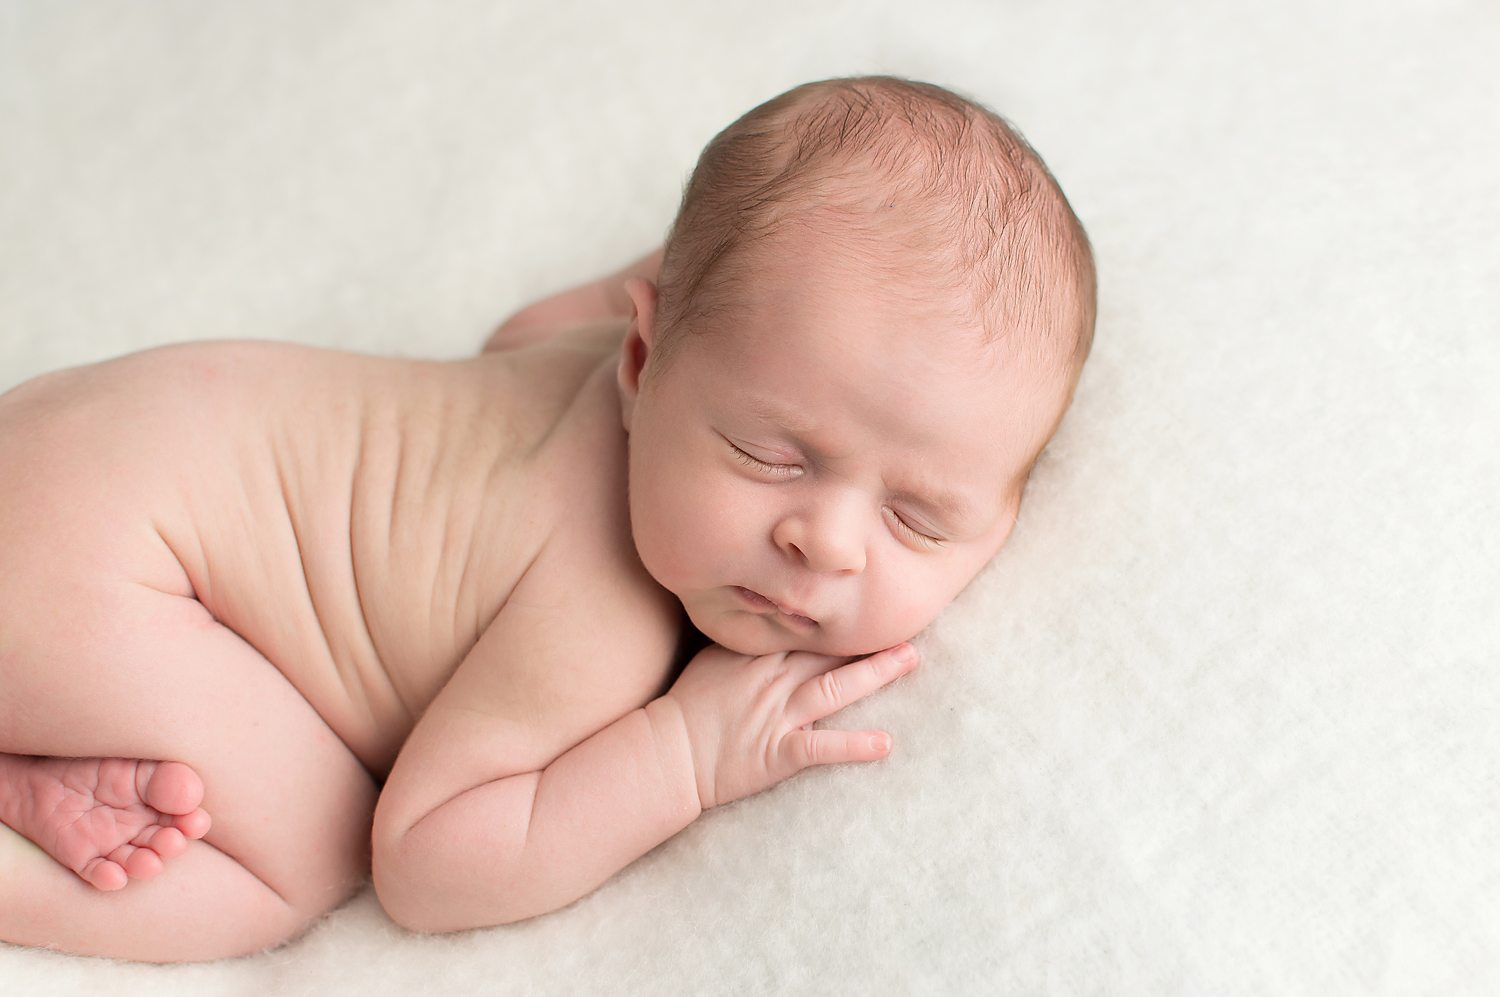 December 31 2015-Tabatha Sue Photography-Cleveland Ohio-New Years Eve Baby-Creamy Neutral Newborn Session-Baby Toes-The Perfect Bum Up Pose-Sleeping Baby.jpg